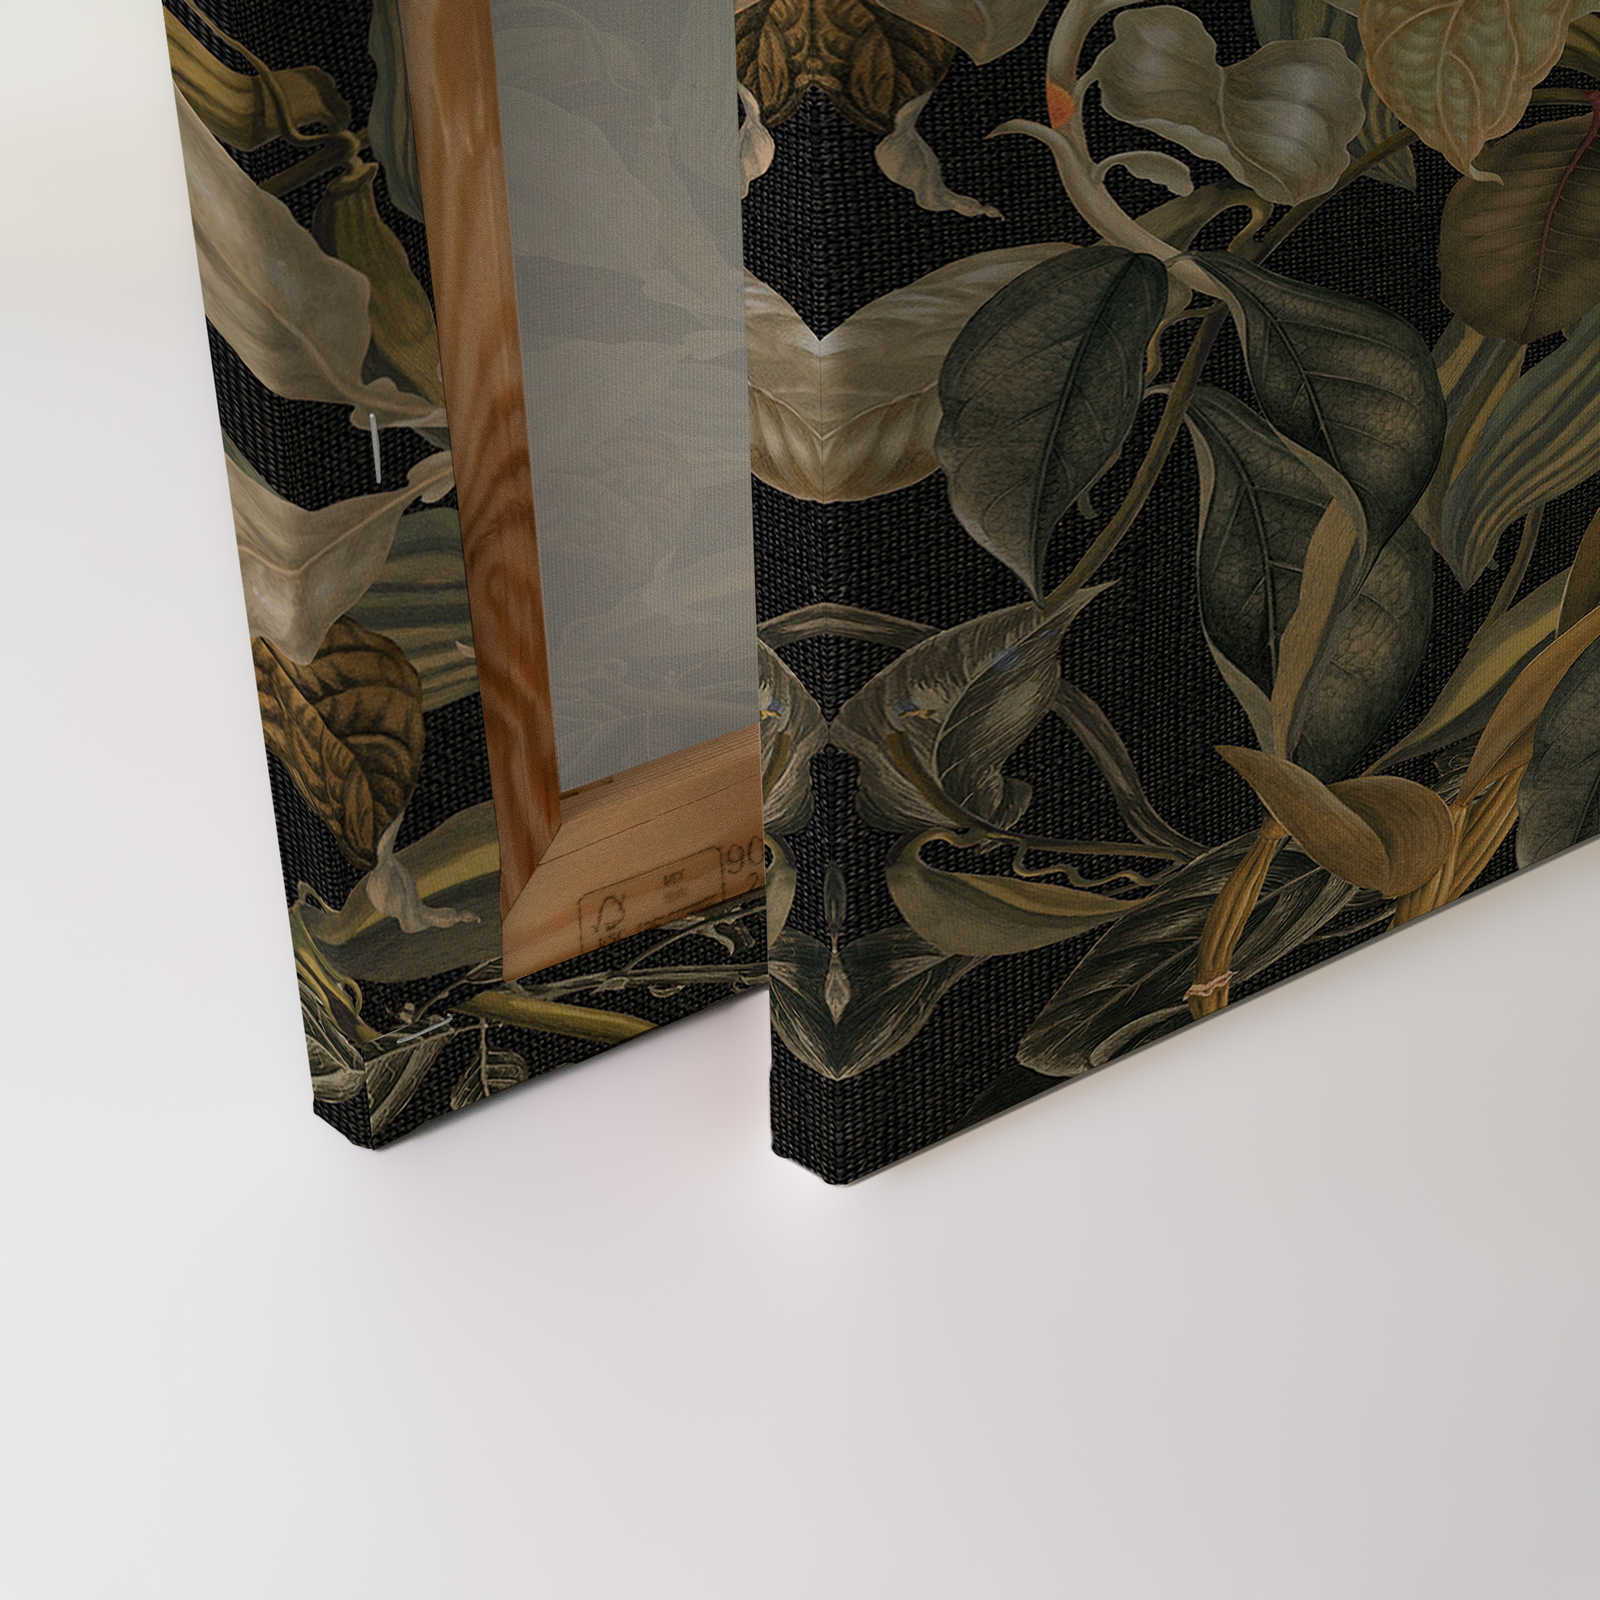             Botanical Canvas Painting with Orchids & Leaves Motif - 1.20 m x 0.80 m
        